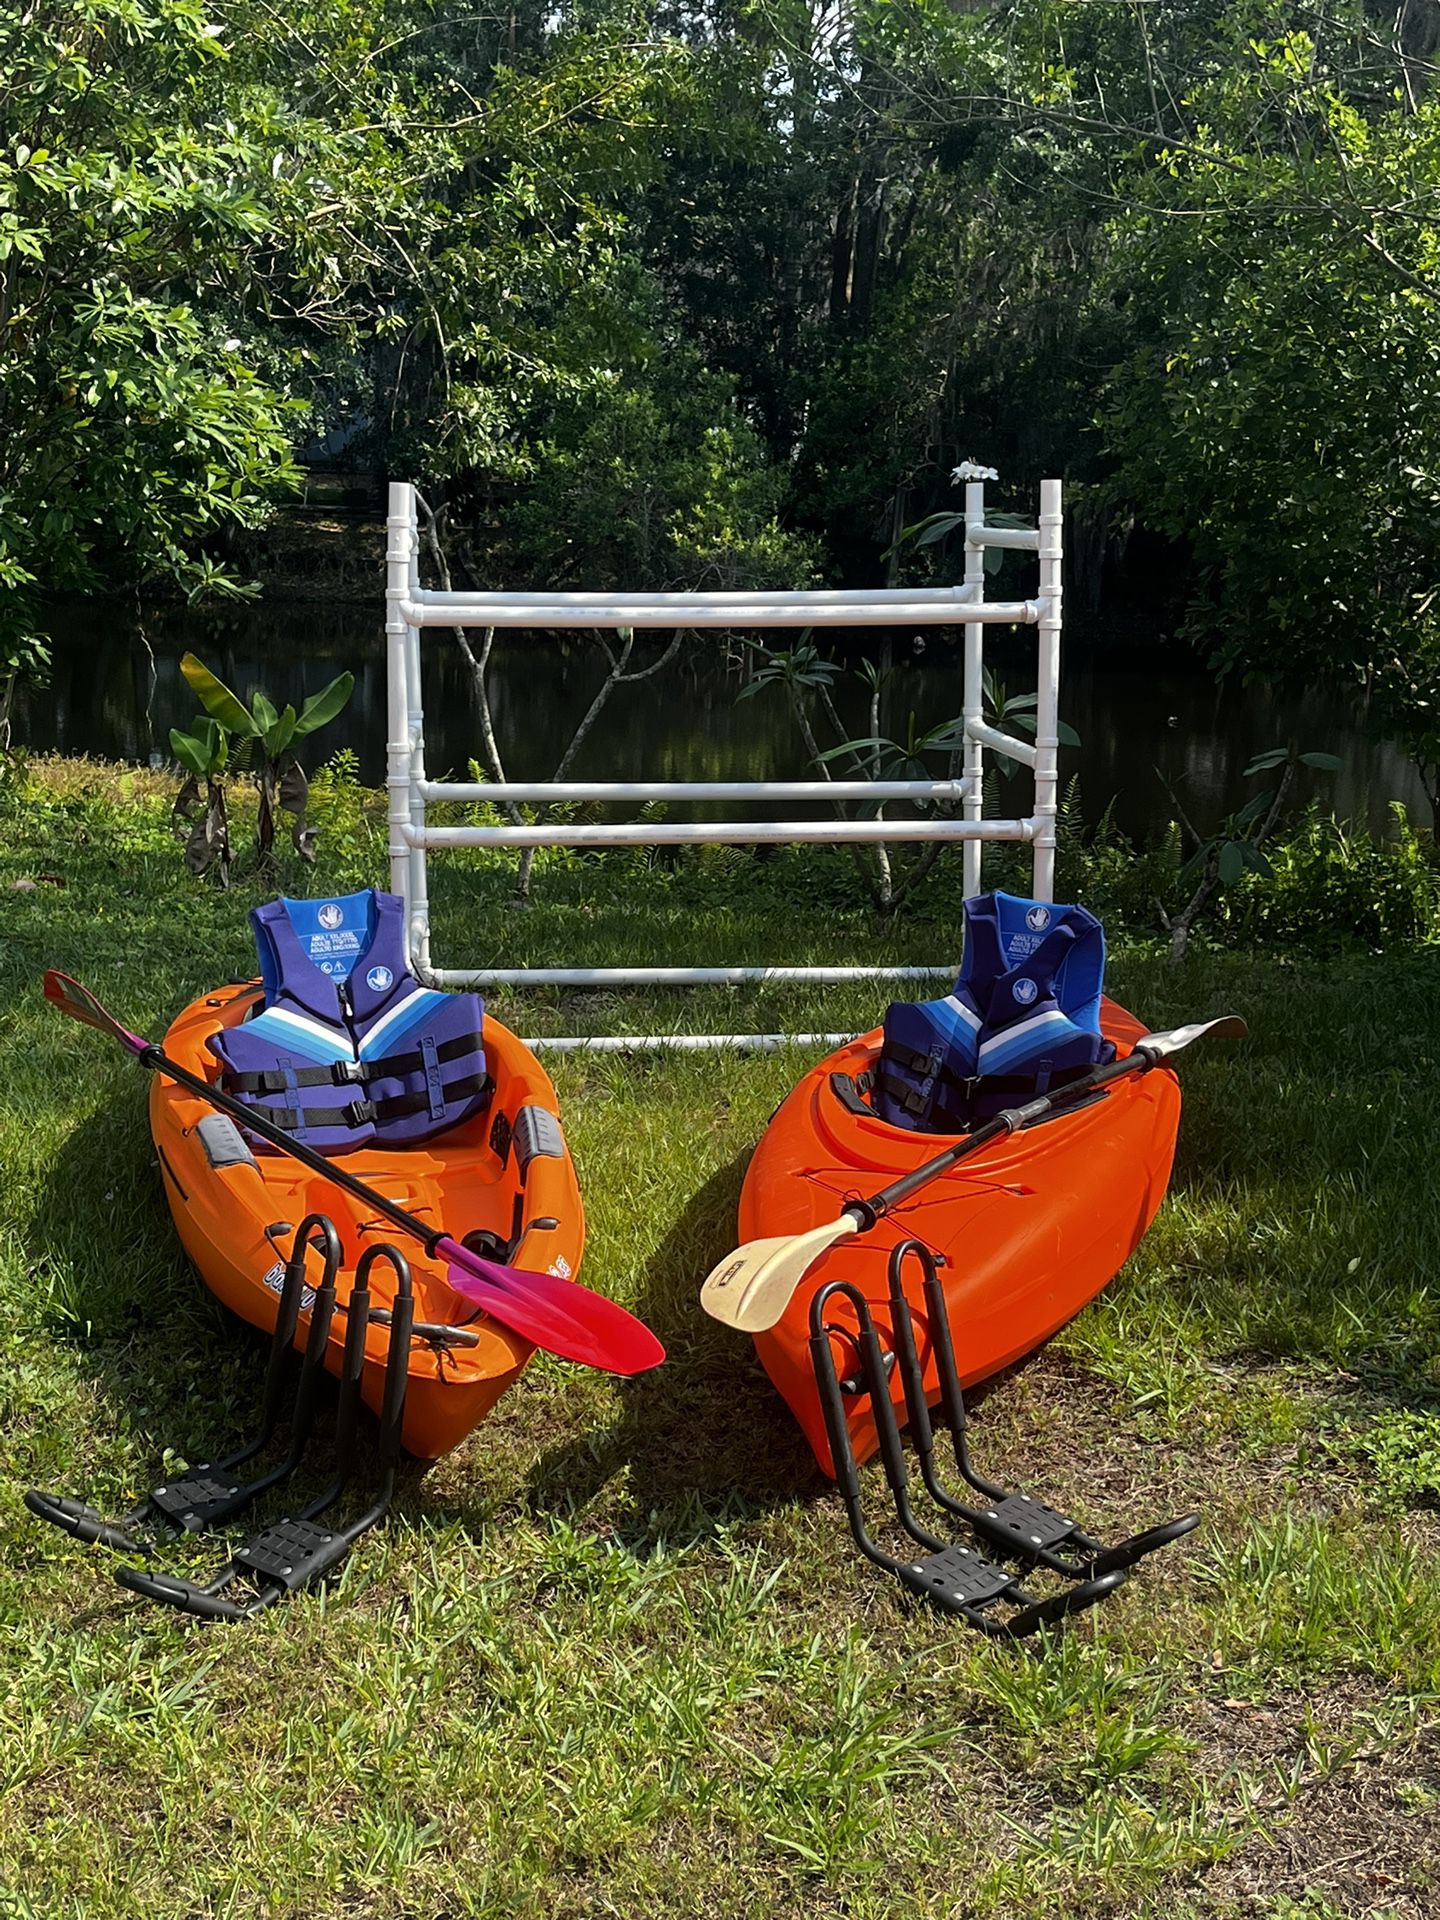 A Complete Sets Of His And Hers Kayaks For Sale